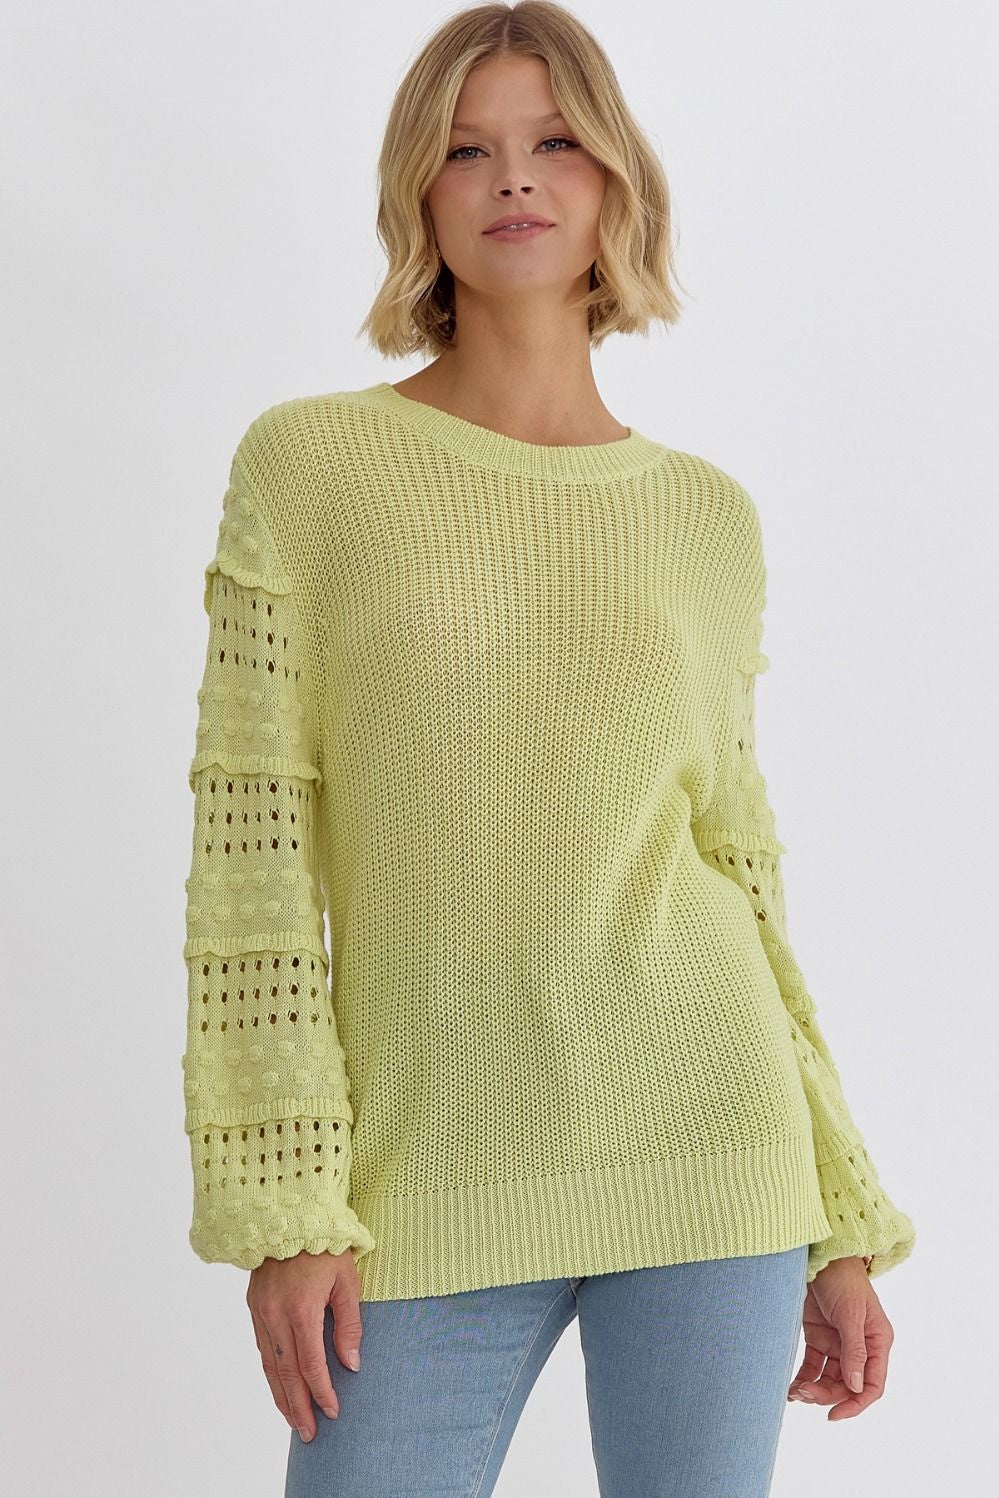 Natural Beauty Sweater